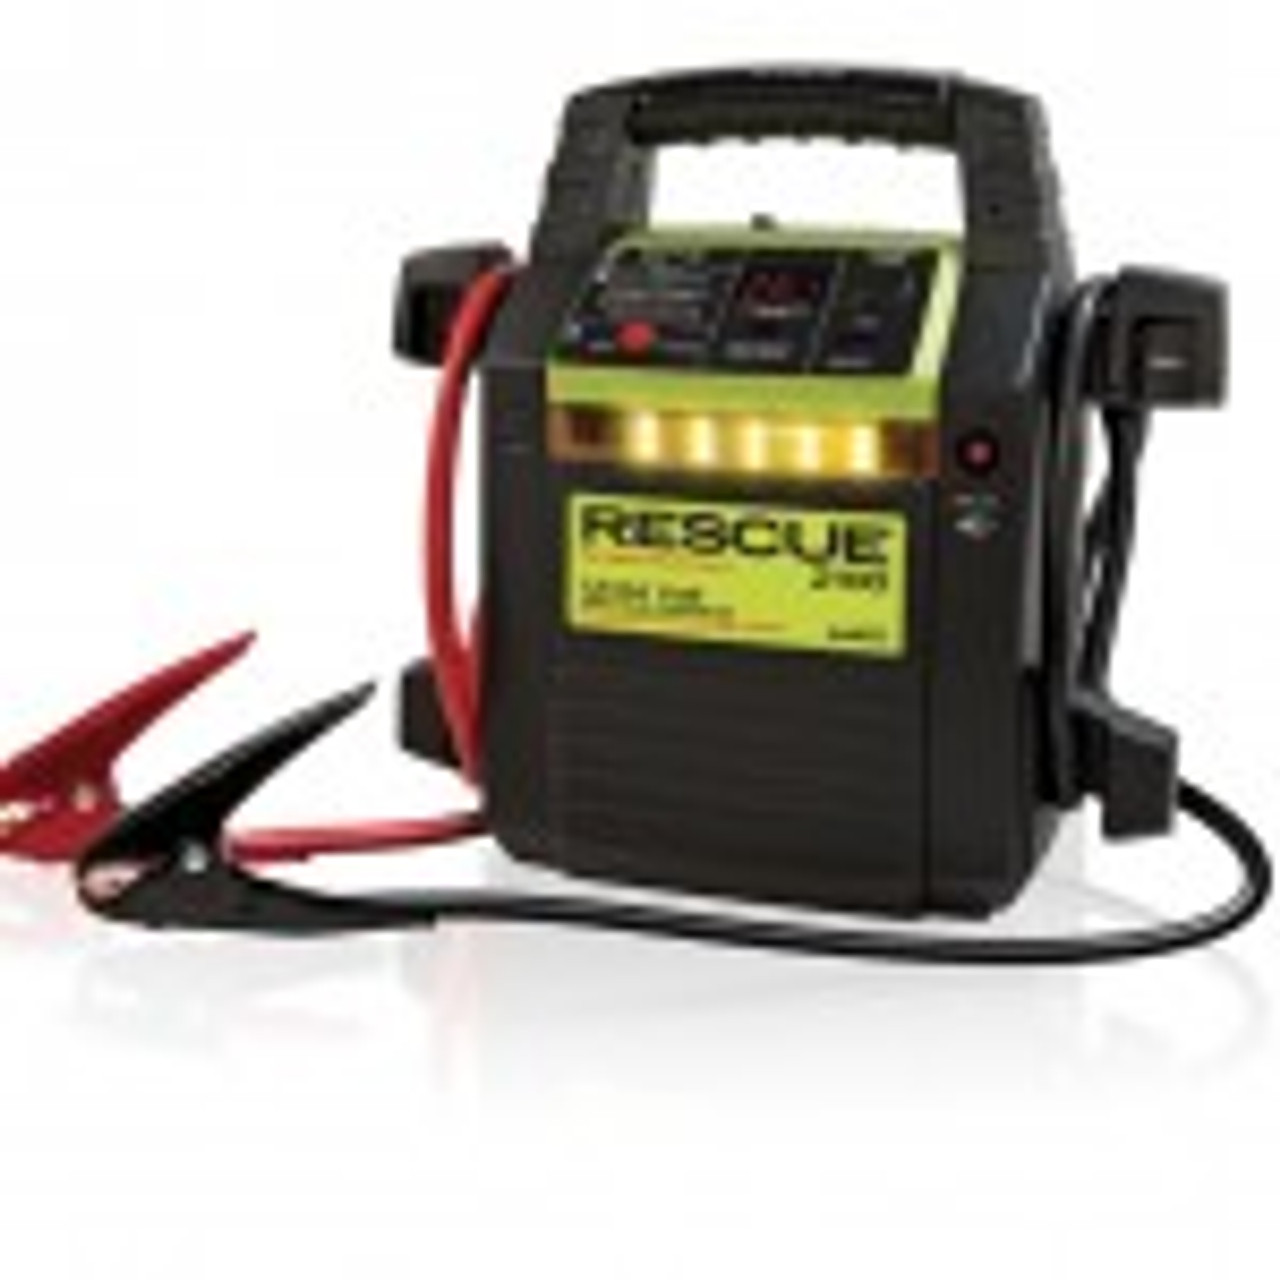 Grote 84-9657 12/24 Volt Dual Voltage Booster Pack